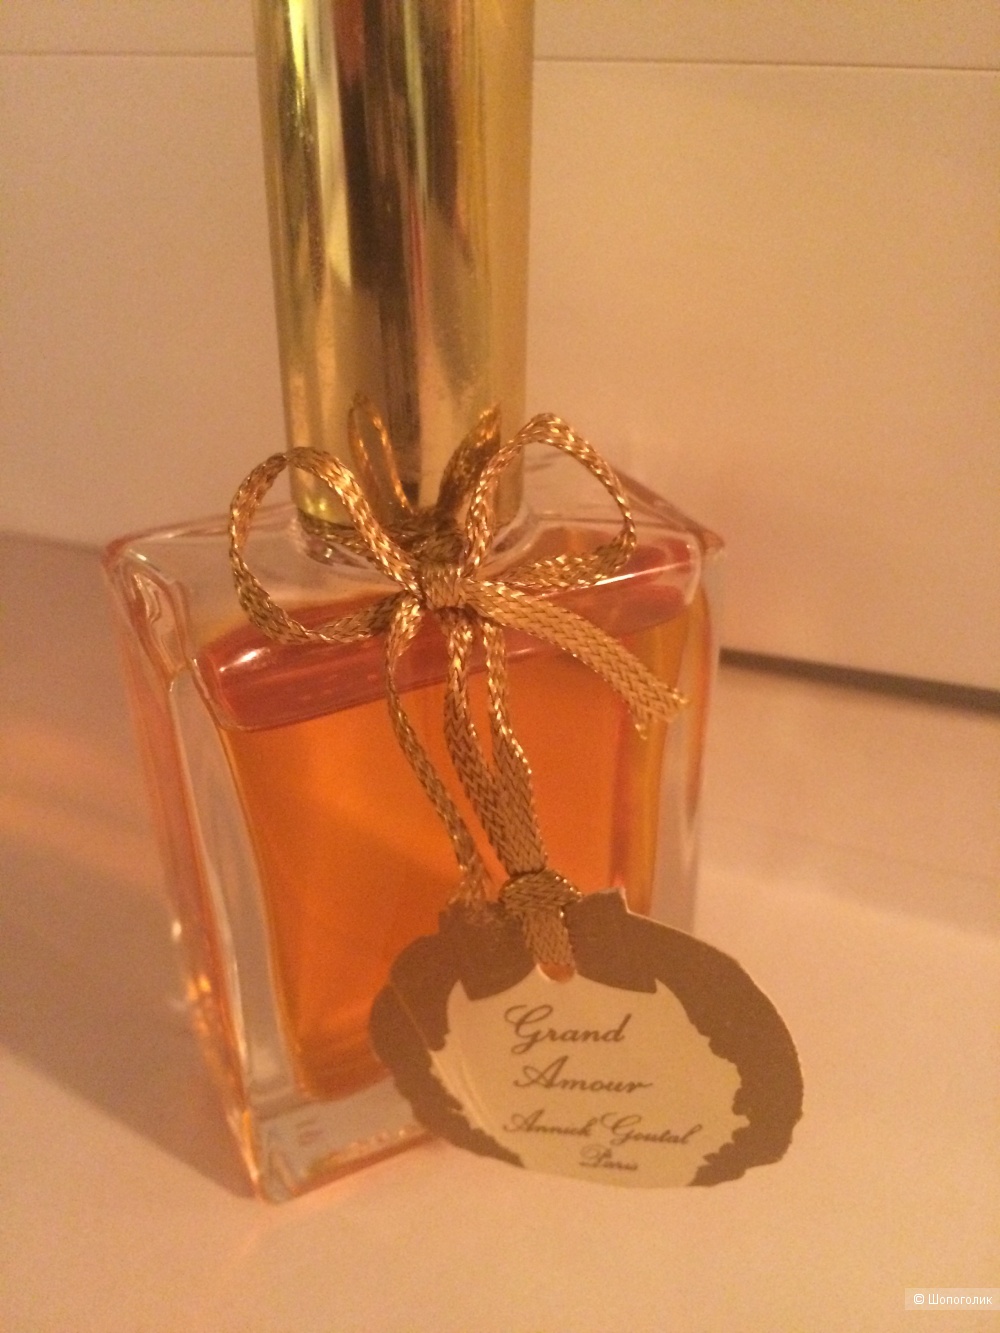 Grand Amour, Annick Goutal ЕDT 30 мл.